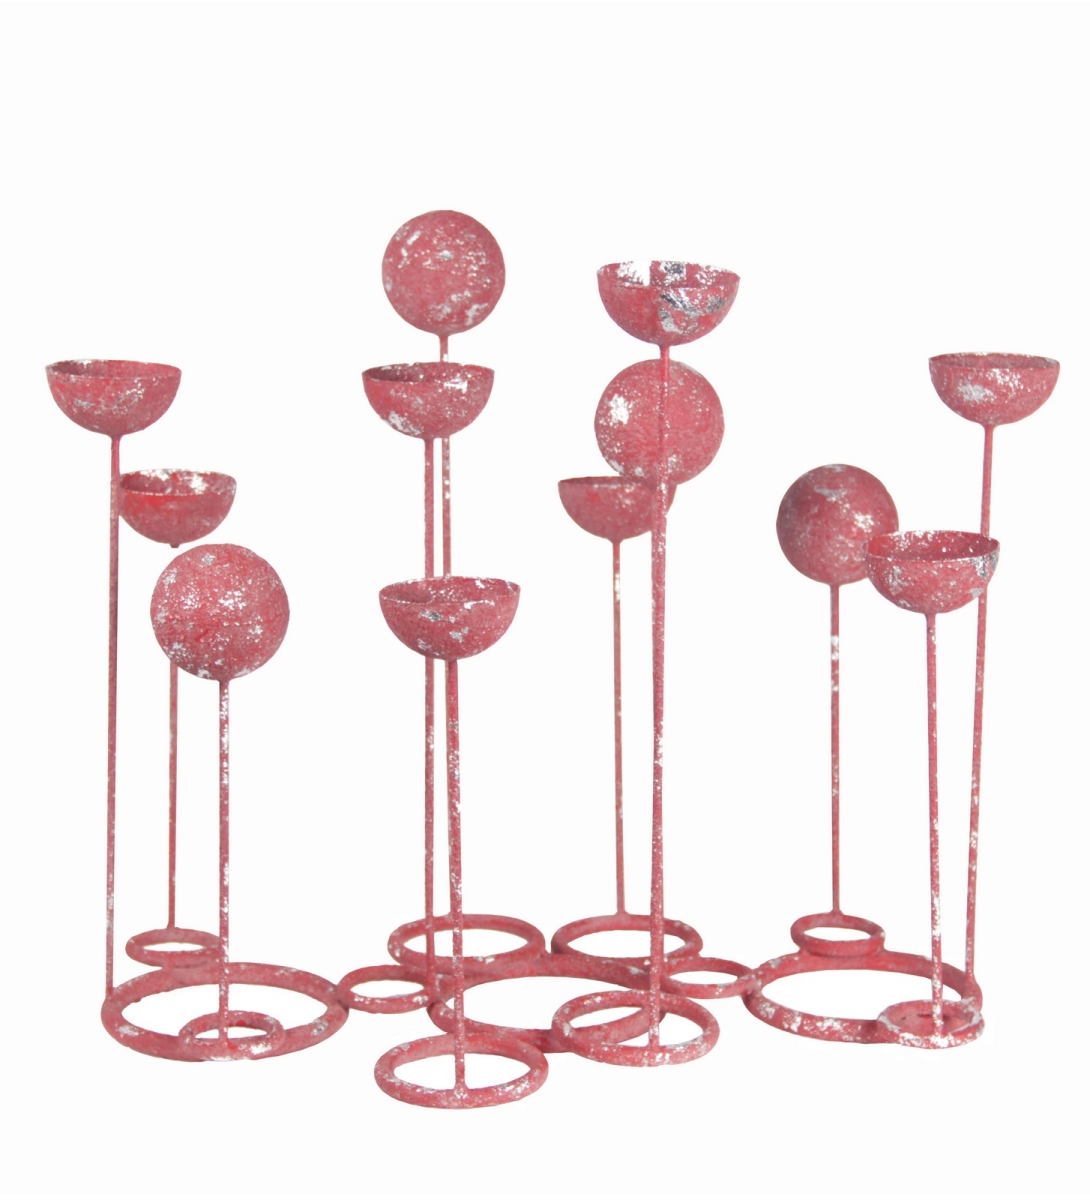 UPC 805572639739 product image for 63973 Multi-Shaped Candle Holders on Stand | upcitemdb.com